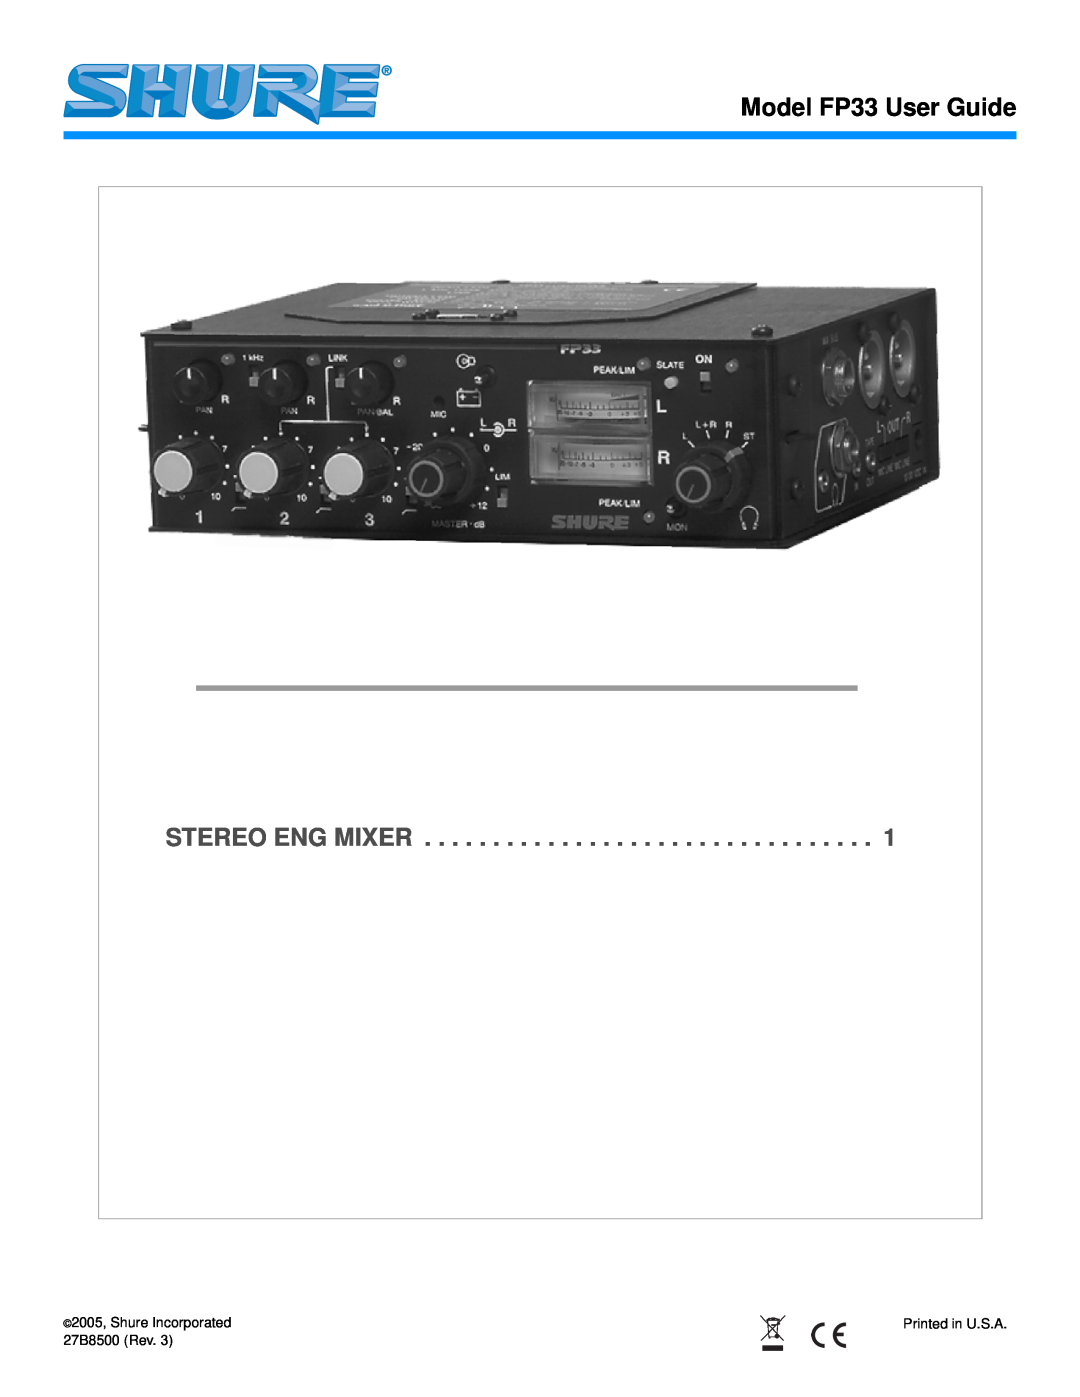 Shure manual Model FP33 User Guide, Stereo Eng Mixer, 2005, Shure Incorporated, Printed in U.S.A, 27B8500 Rev 